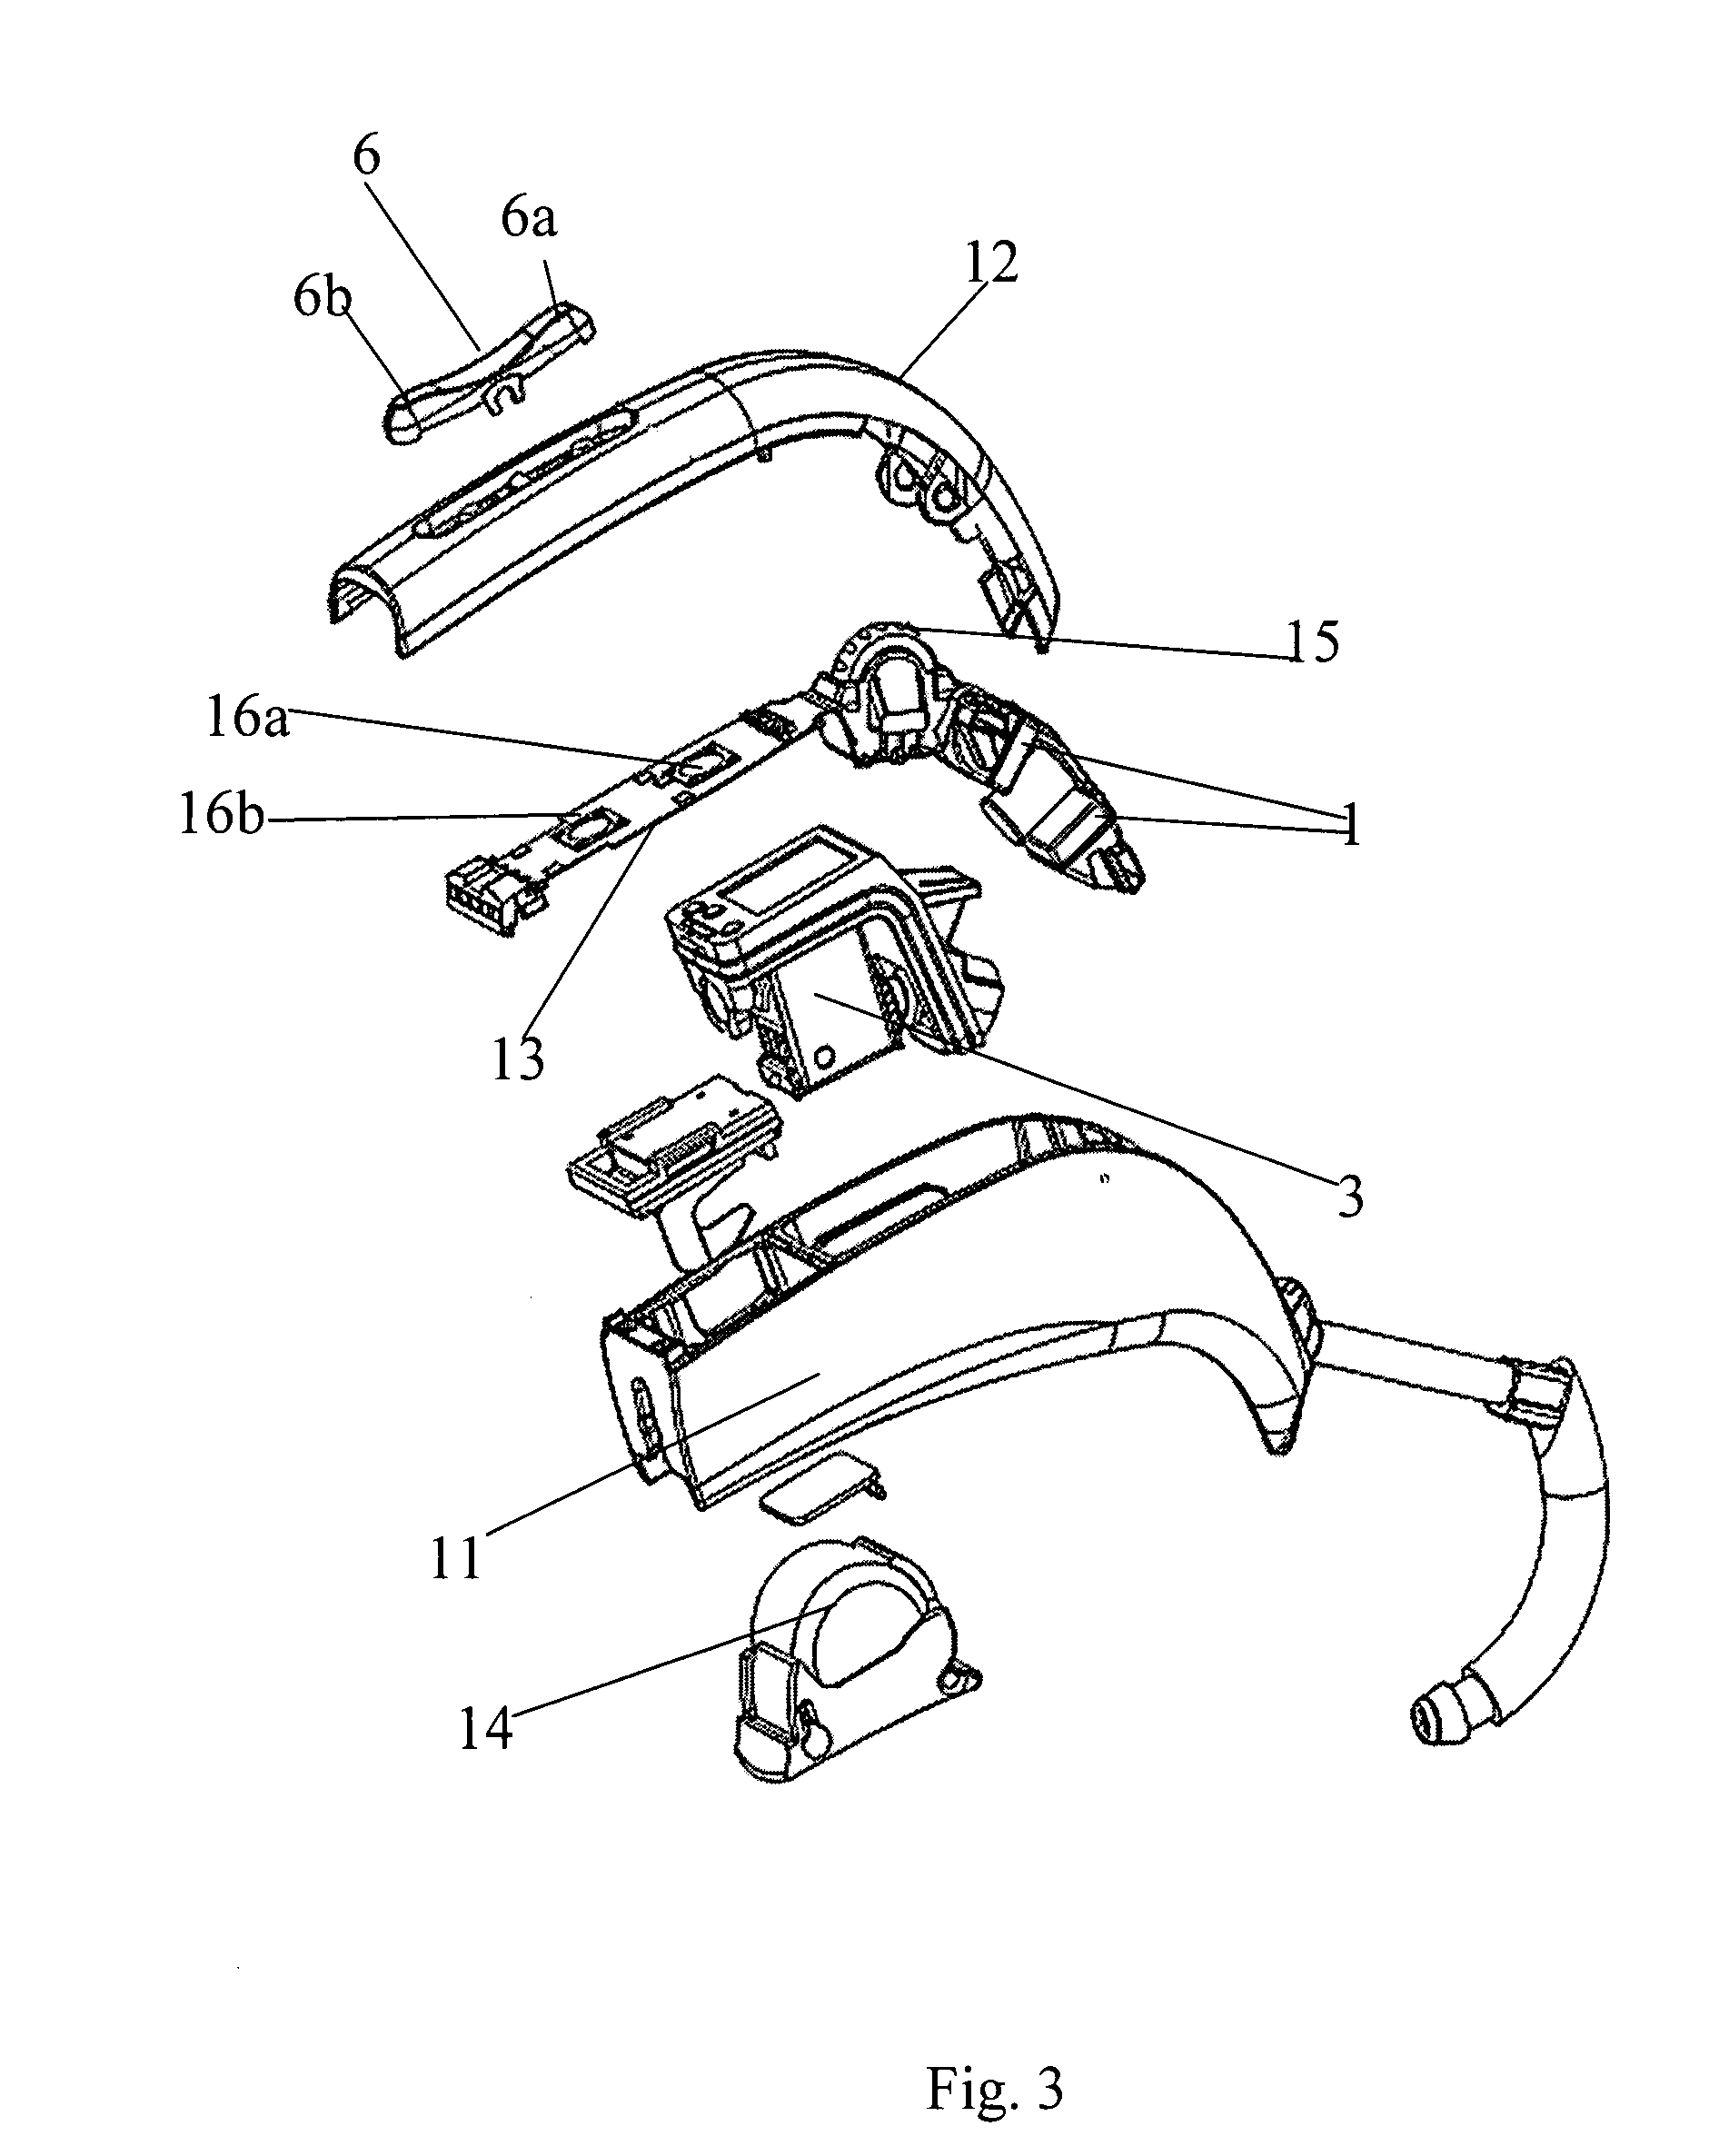 Volume control in a hearing aid and hearing aid with volume control